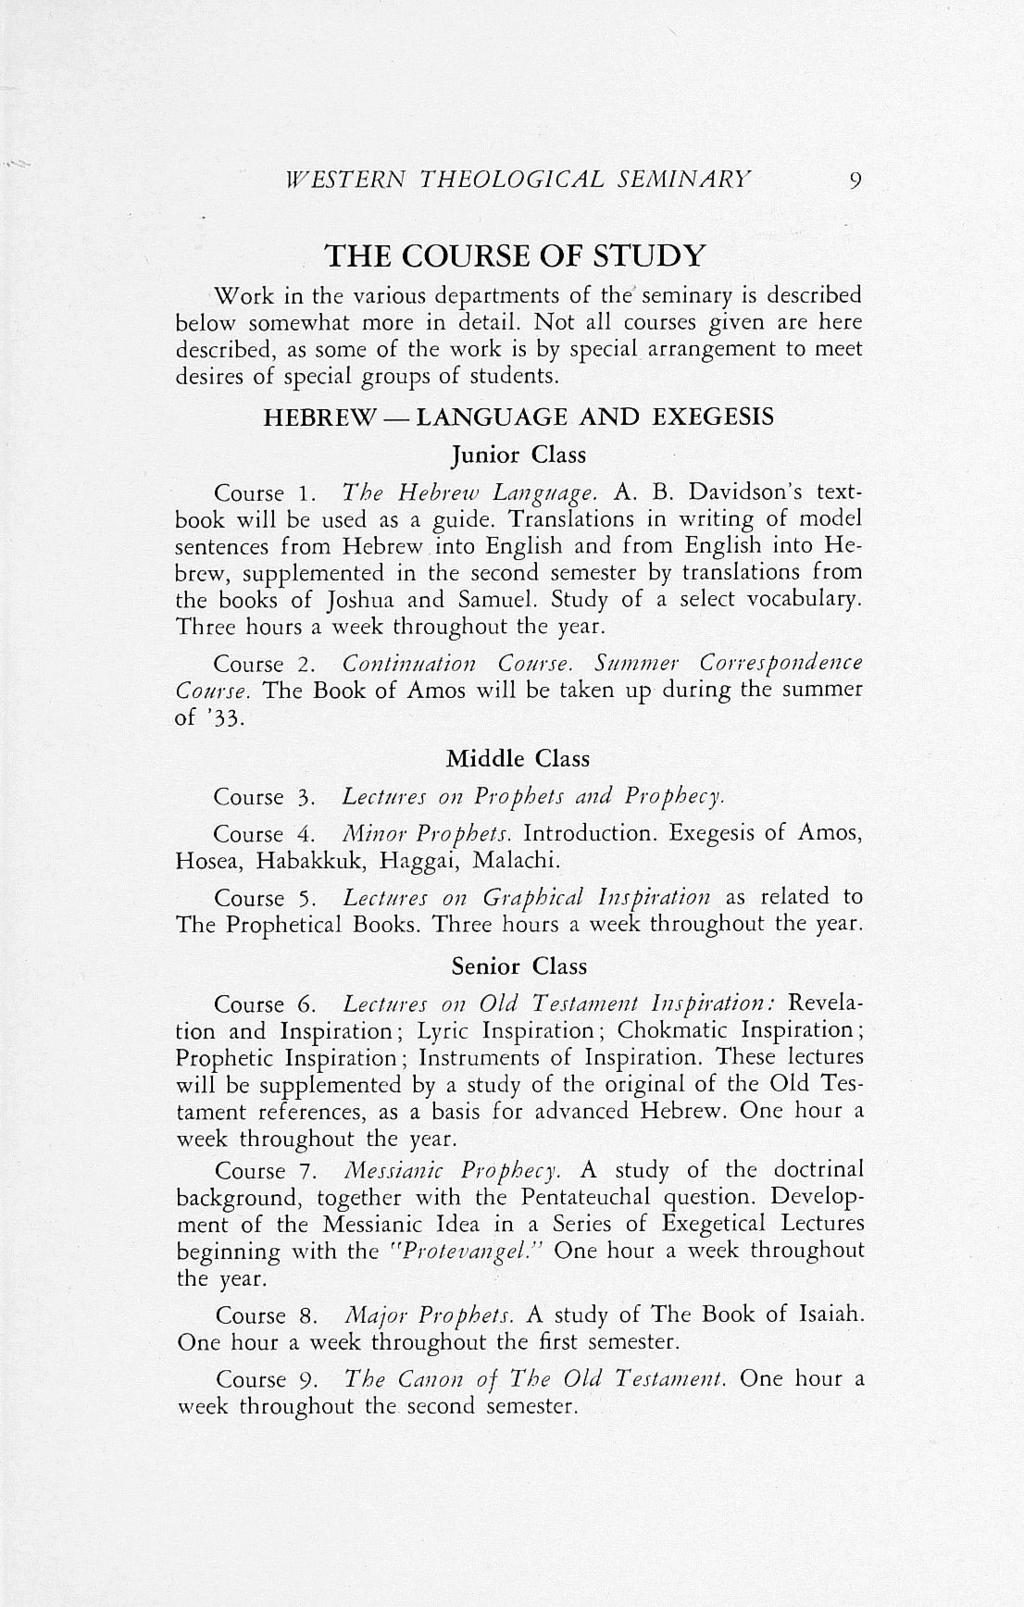 WESTERN THEOLOGICAL SEMINARY 9 THE COURSE OF STUDY Work in the various departments of the seminary is described below somewhat more in detail.